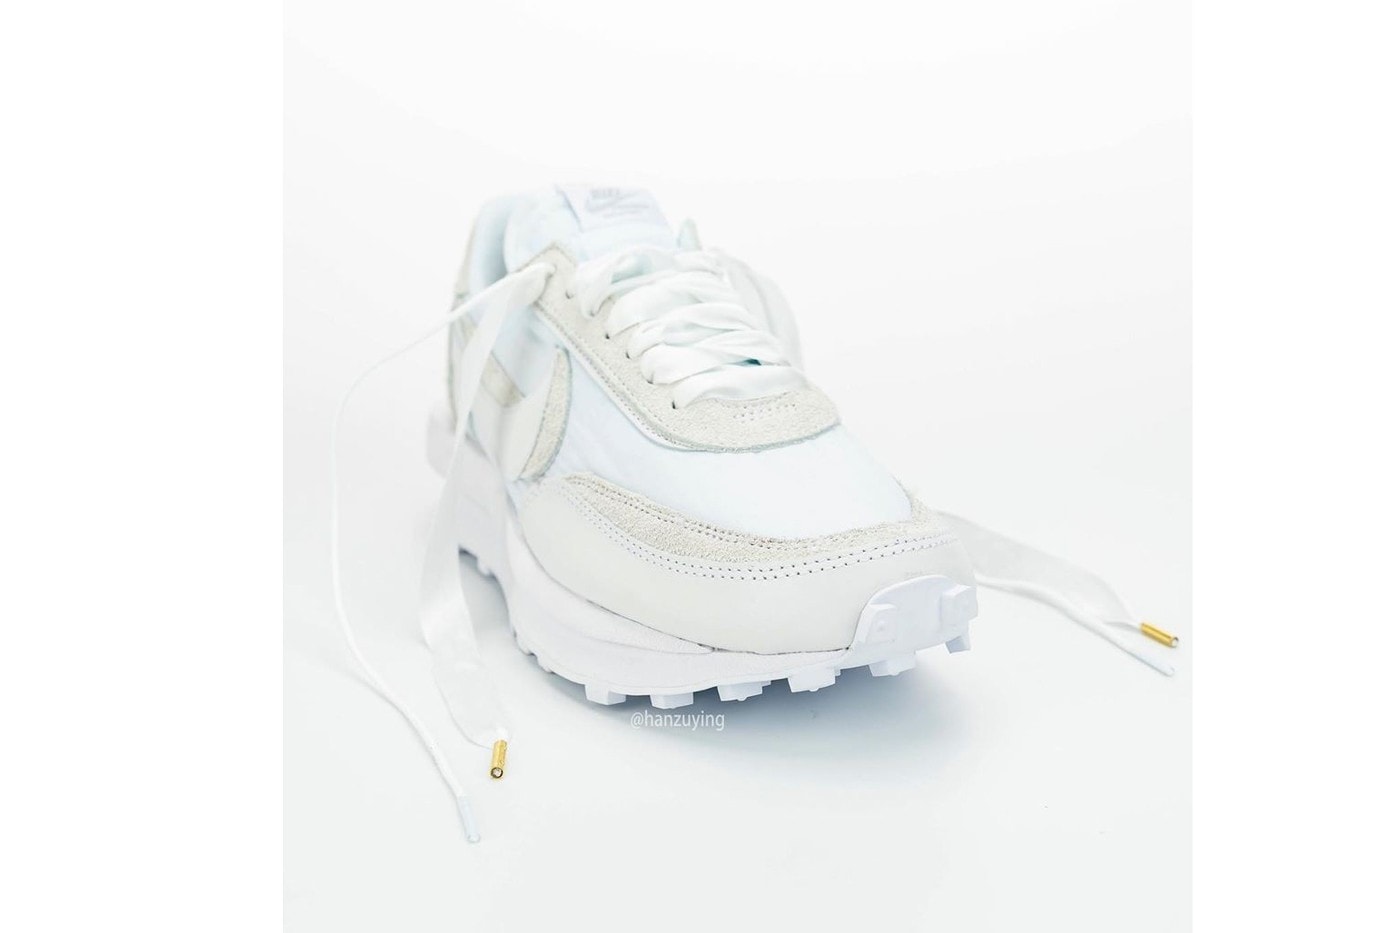 sacai x Nike LDWaffle "White" Closer Look Release Date Sneaker Chitose Abe Collaboration White Grey 